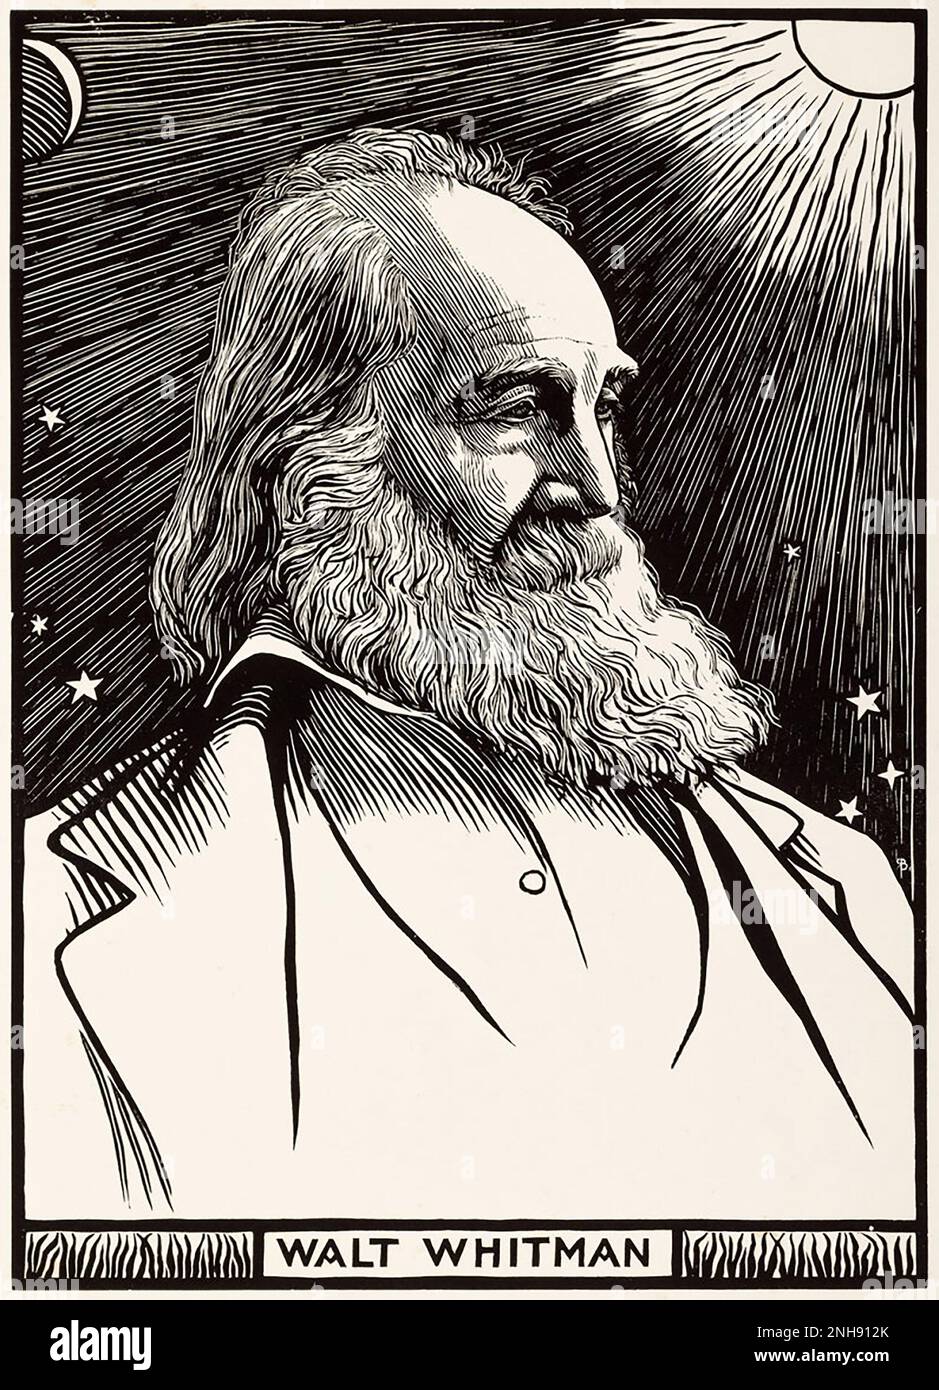 Walt Whitman (1819-1892), American poet, essayist and journalist, famous for his 1855 poetry collection Leaves of Grass. Woodcut by Robert Bryden (1865-1939), a Scots artist and sculptor, from 1899. Stock Photo